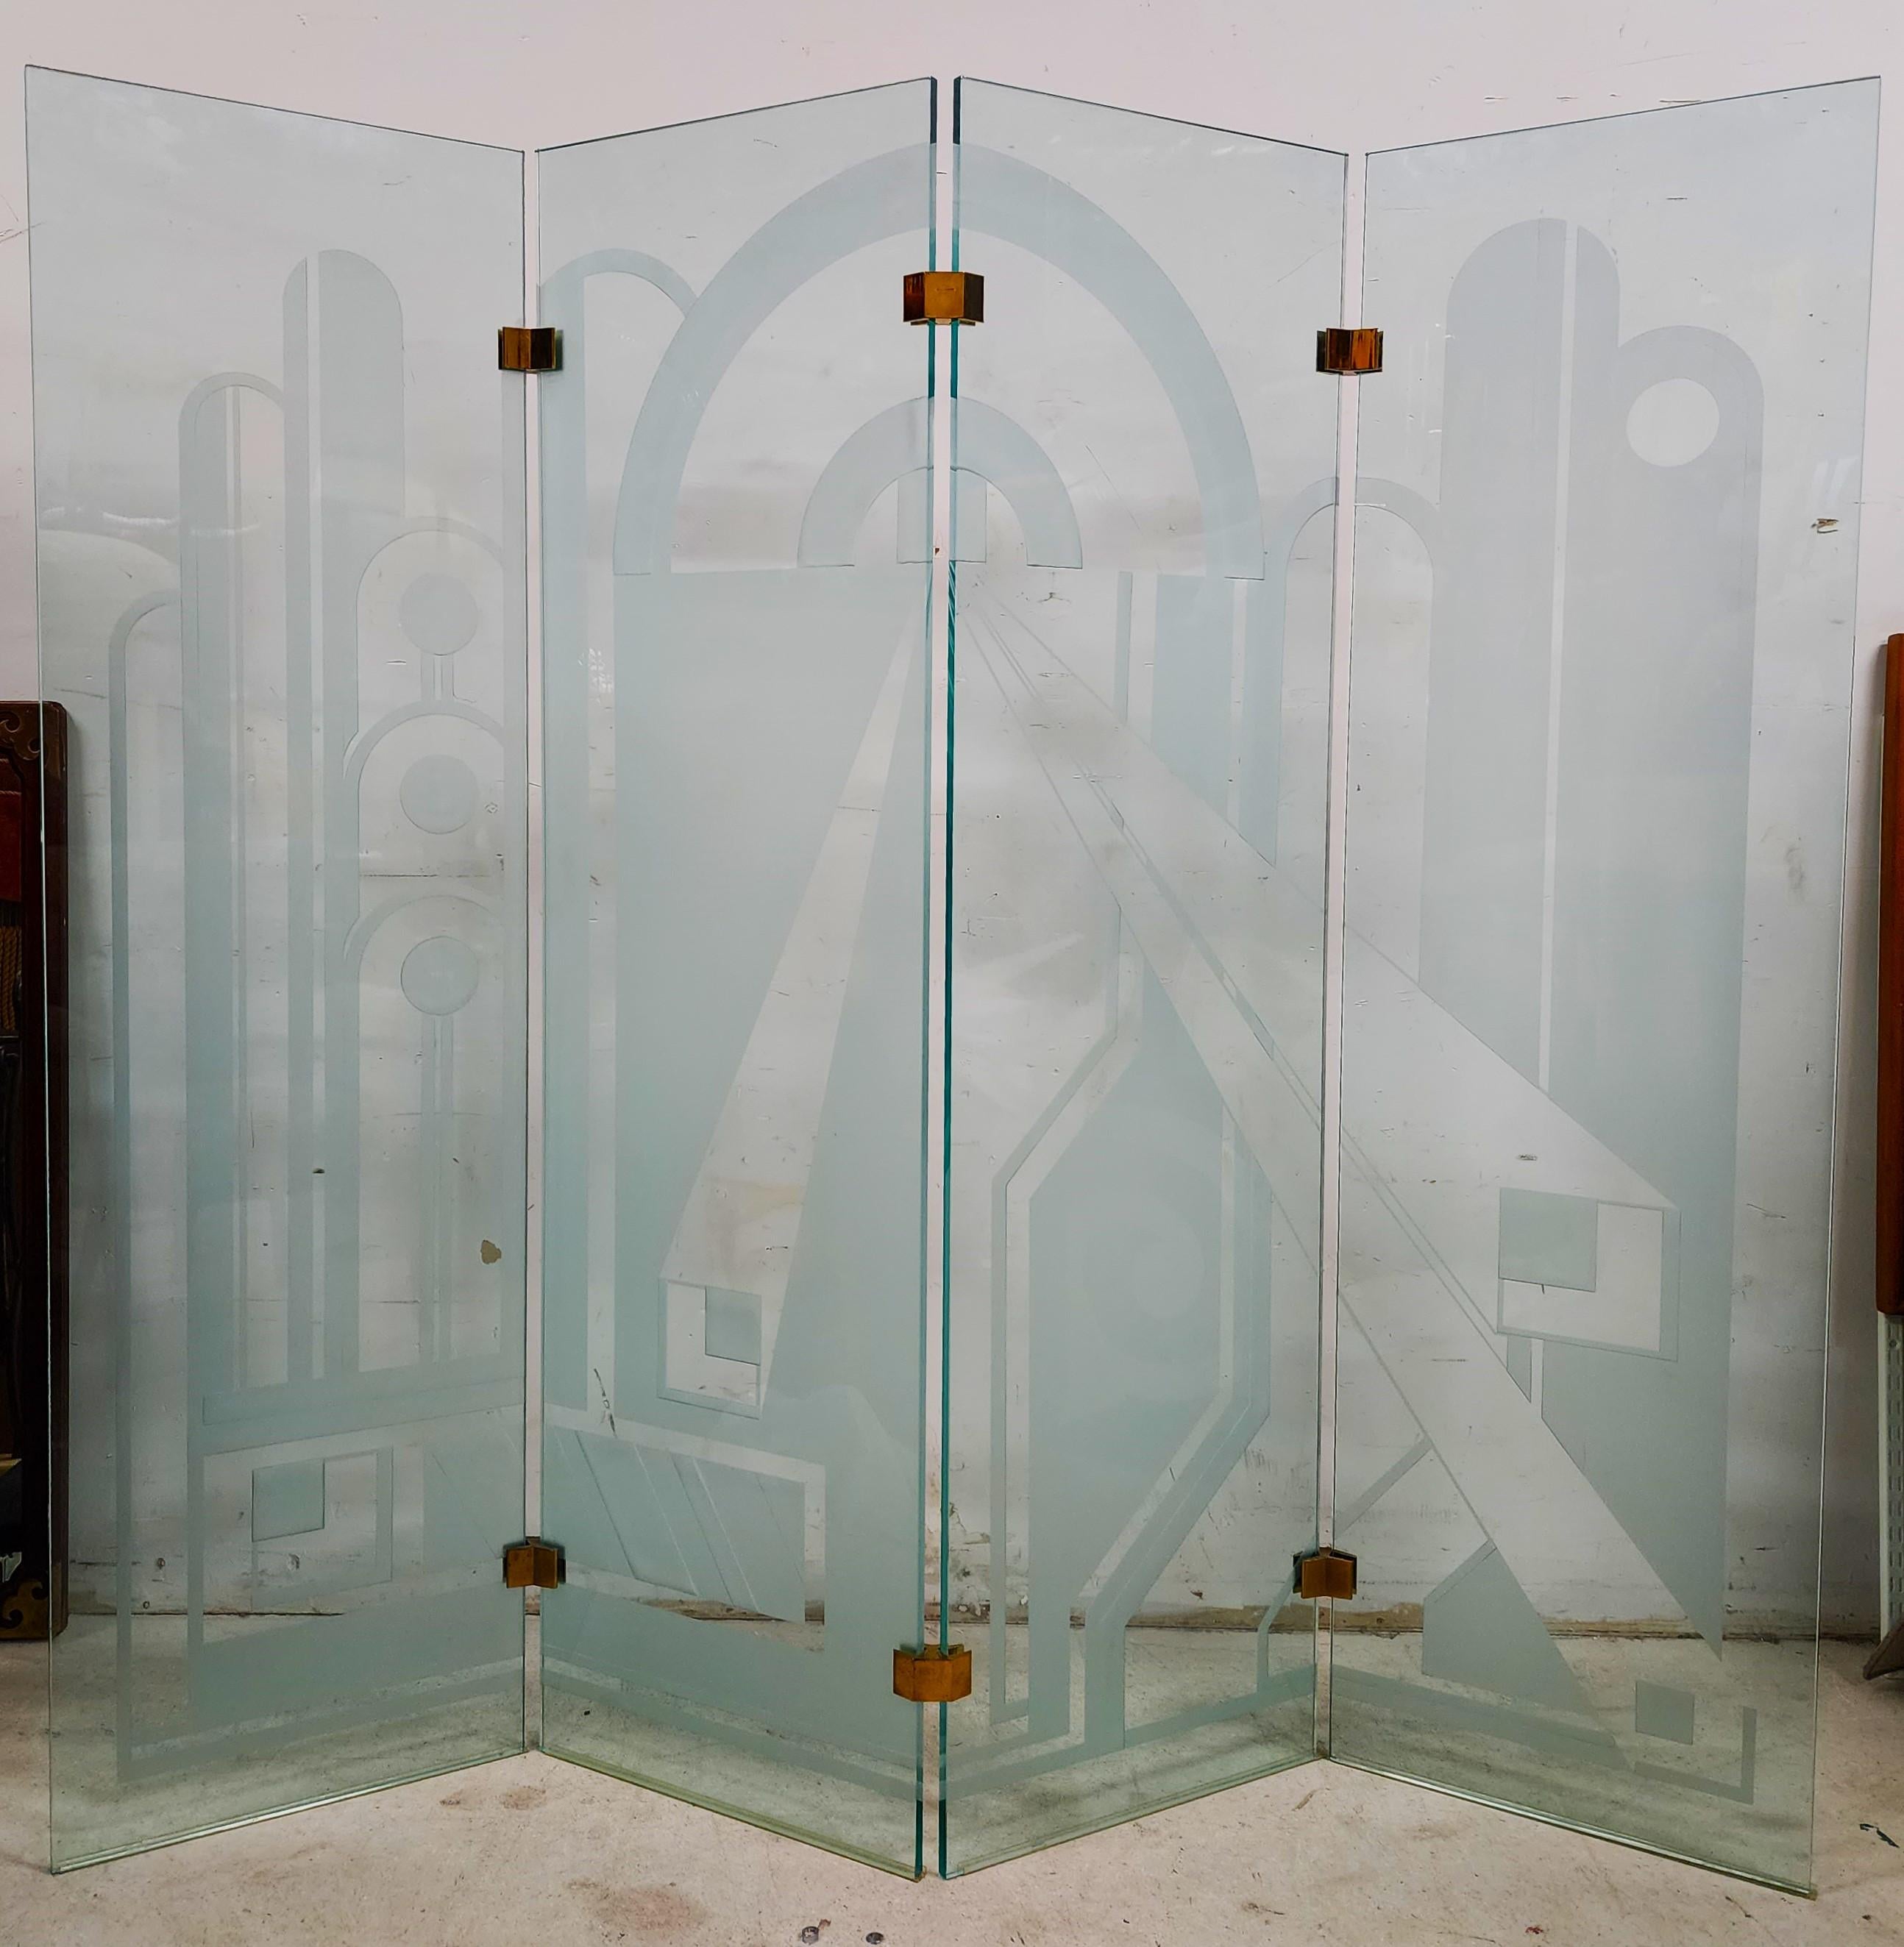 Offering One Of Our Recent Palm Beach Estate Fine Furniture Acquisitions Of A

Vintage 4 Panel Etched Glass Screen Art Deco Style

This unique four-panel etched glass room divider features opaque tinted glass with etched Architectural Art Deco